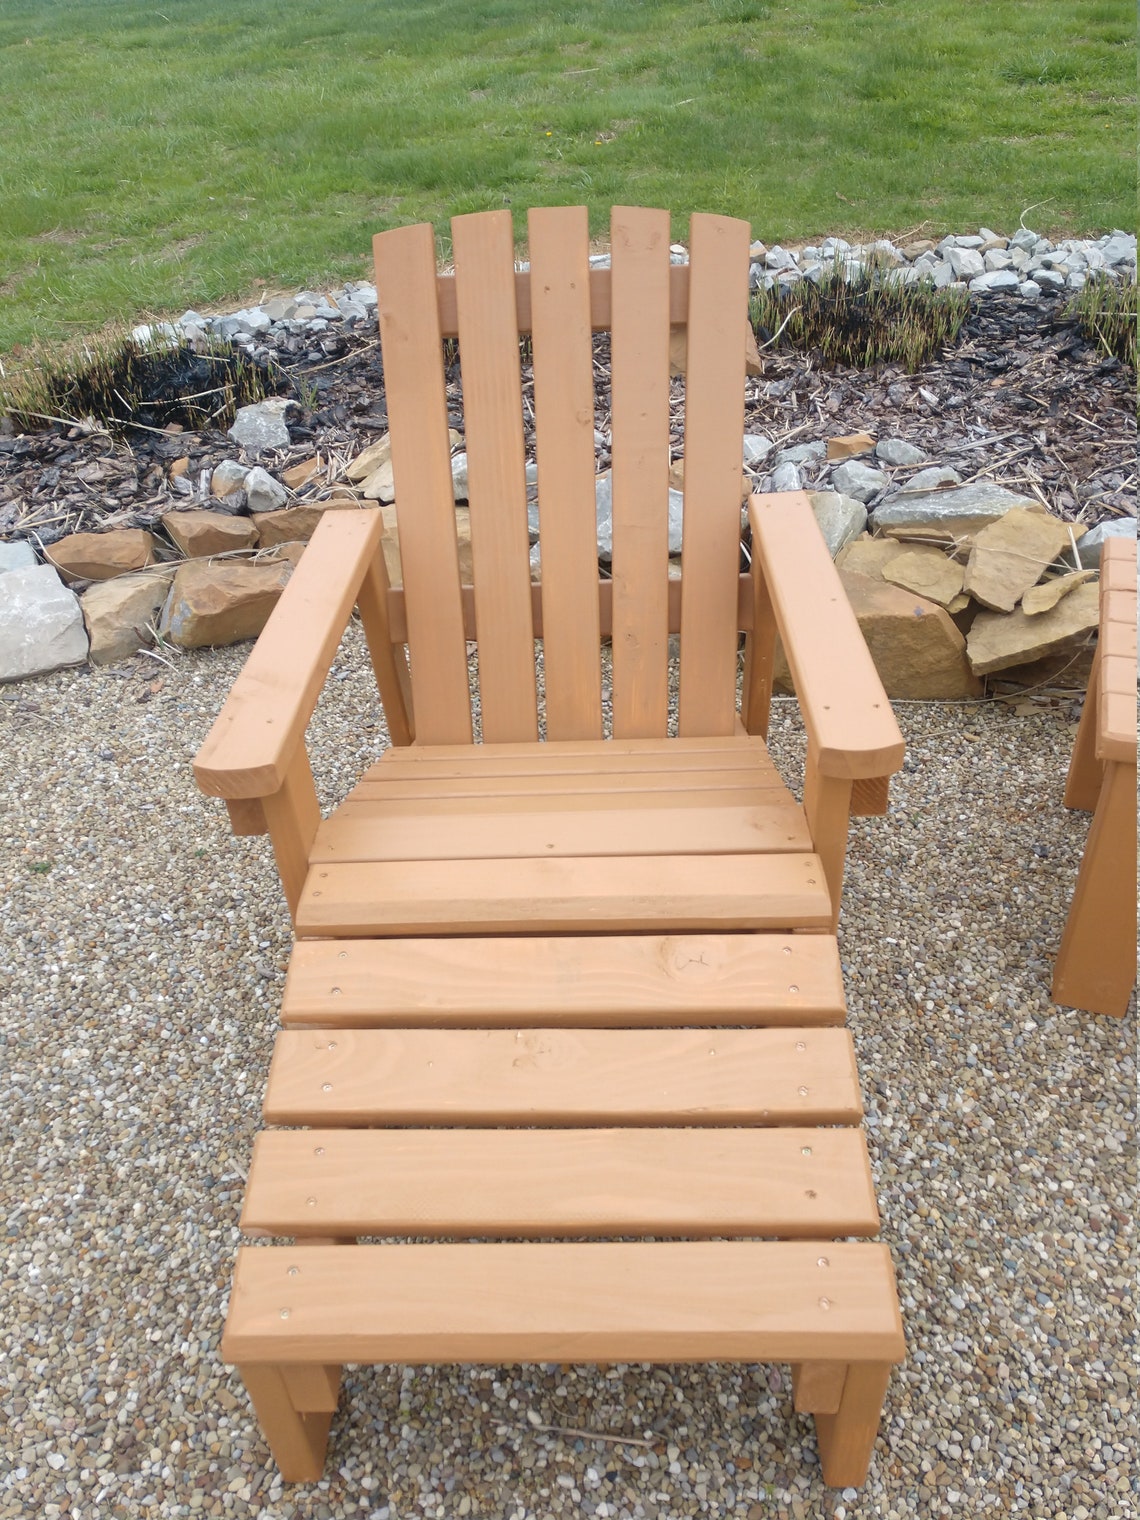 2x4 Foot Stool Plans For 2x4 Adirondack Chair Etsy